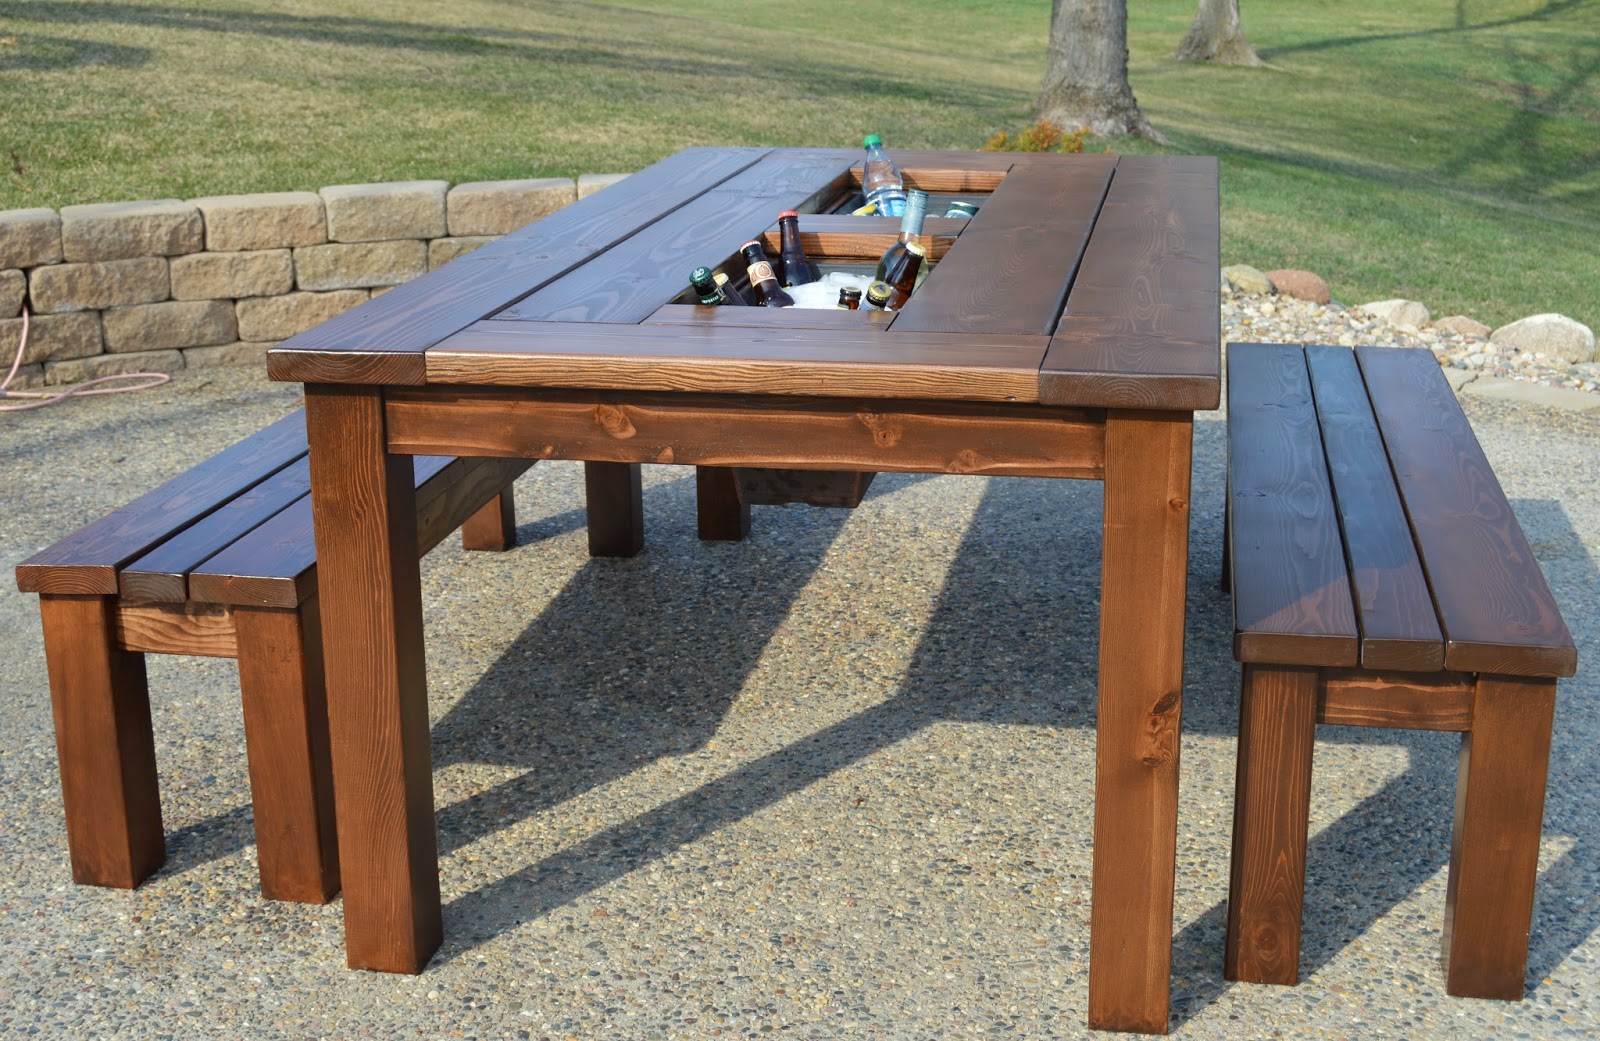 KRUSE'S WORKSHOP: Patio Party Table with Built In Beer ...